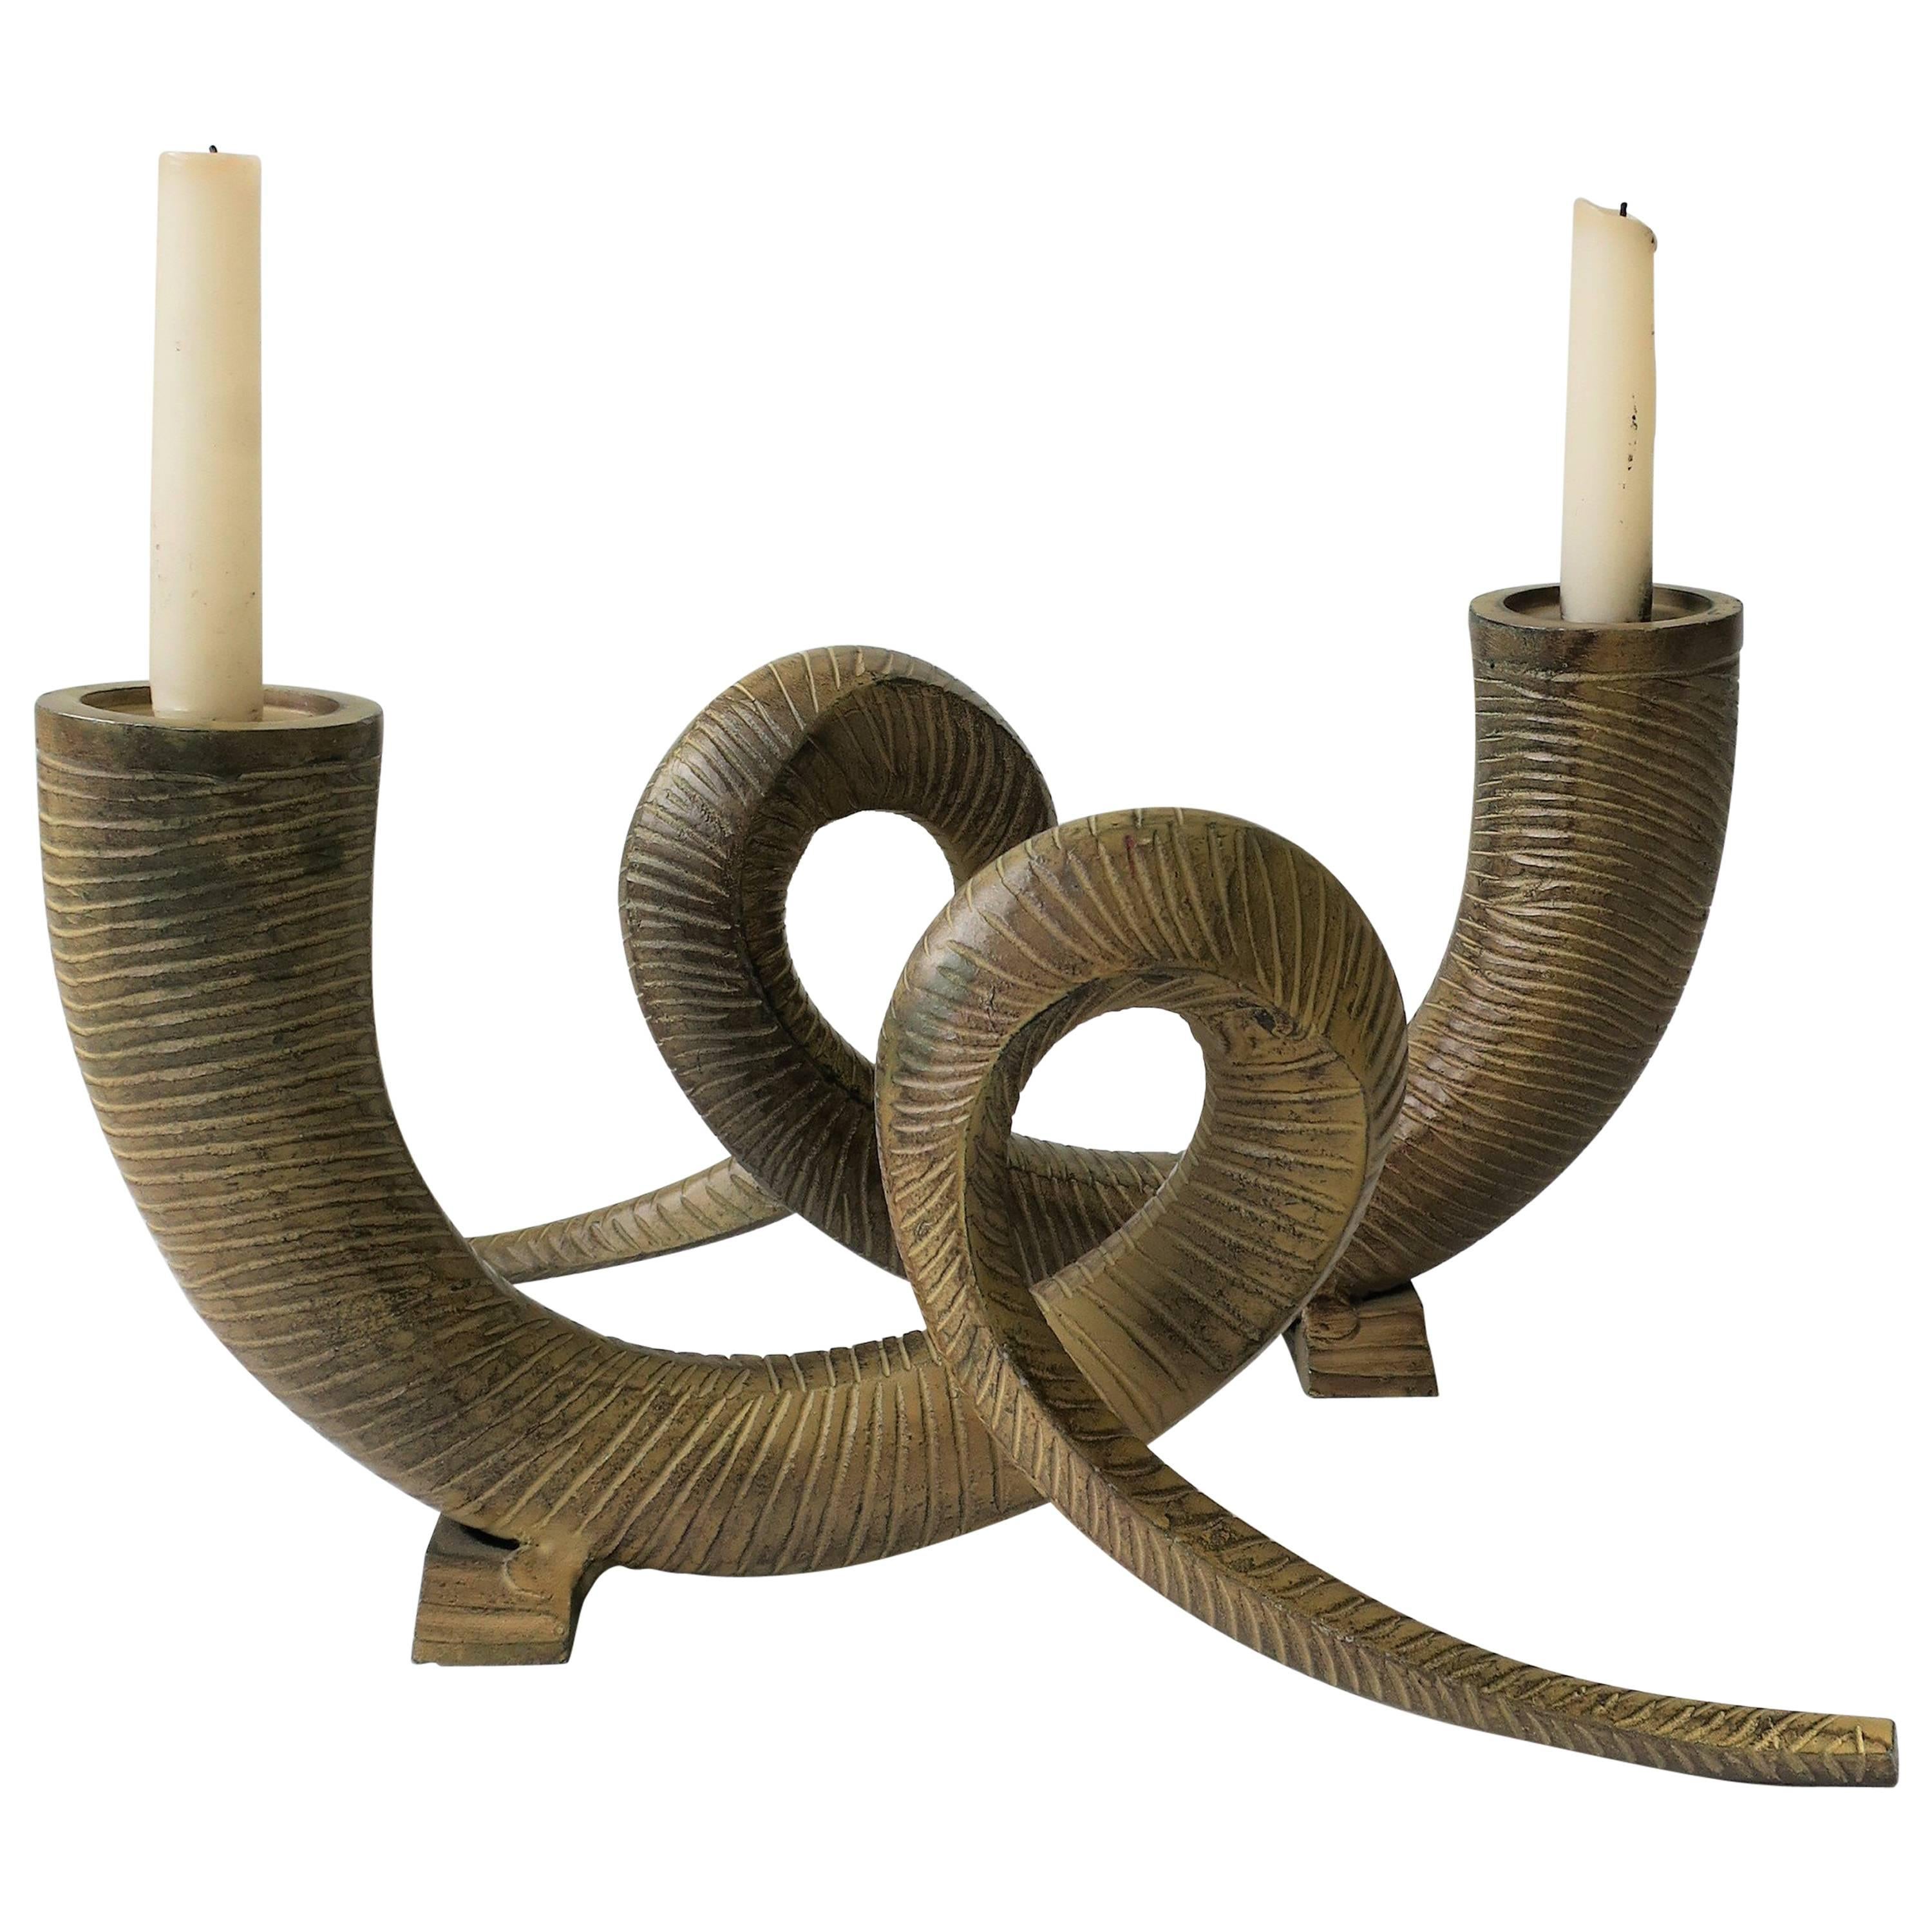 80s Metal Animal Rams Horn Sculptures or Candlestick Holders